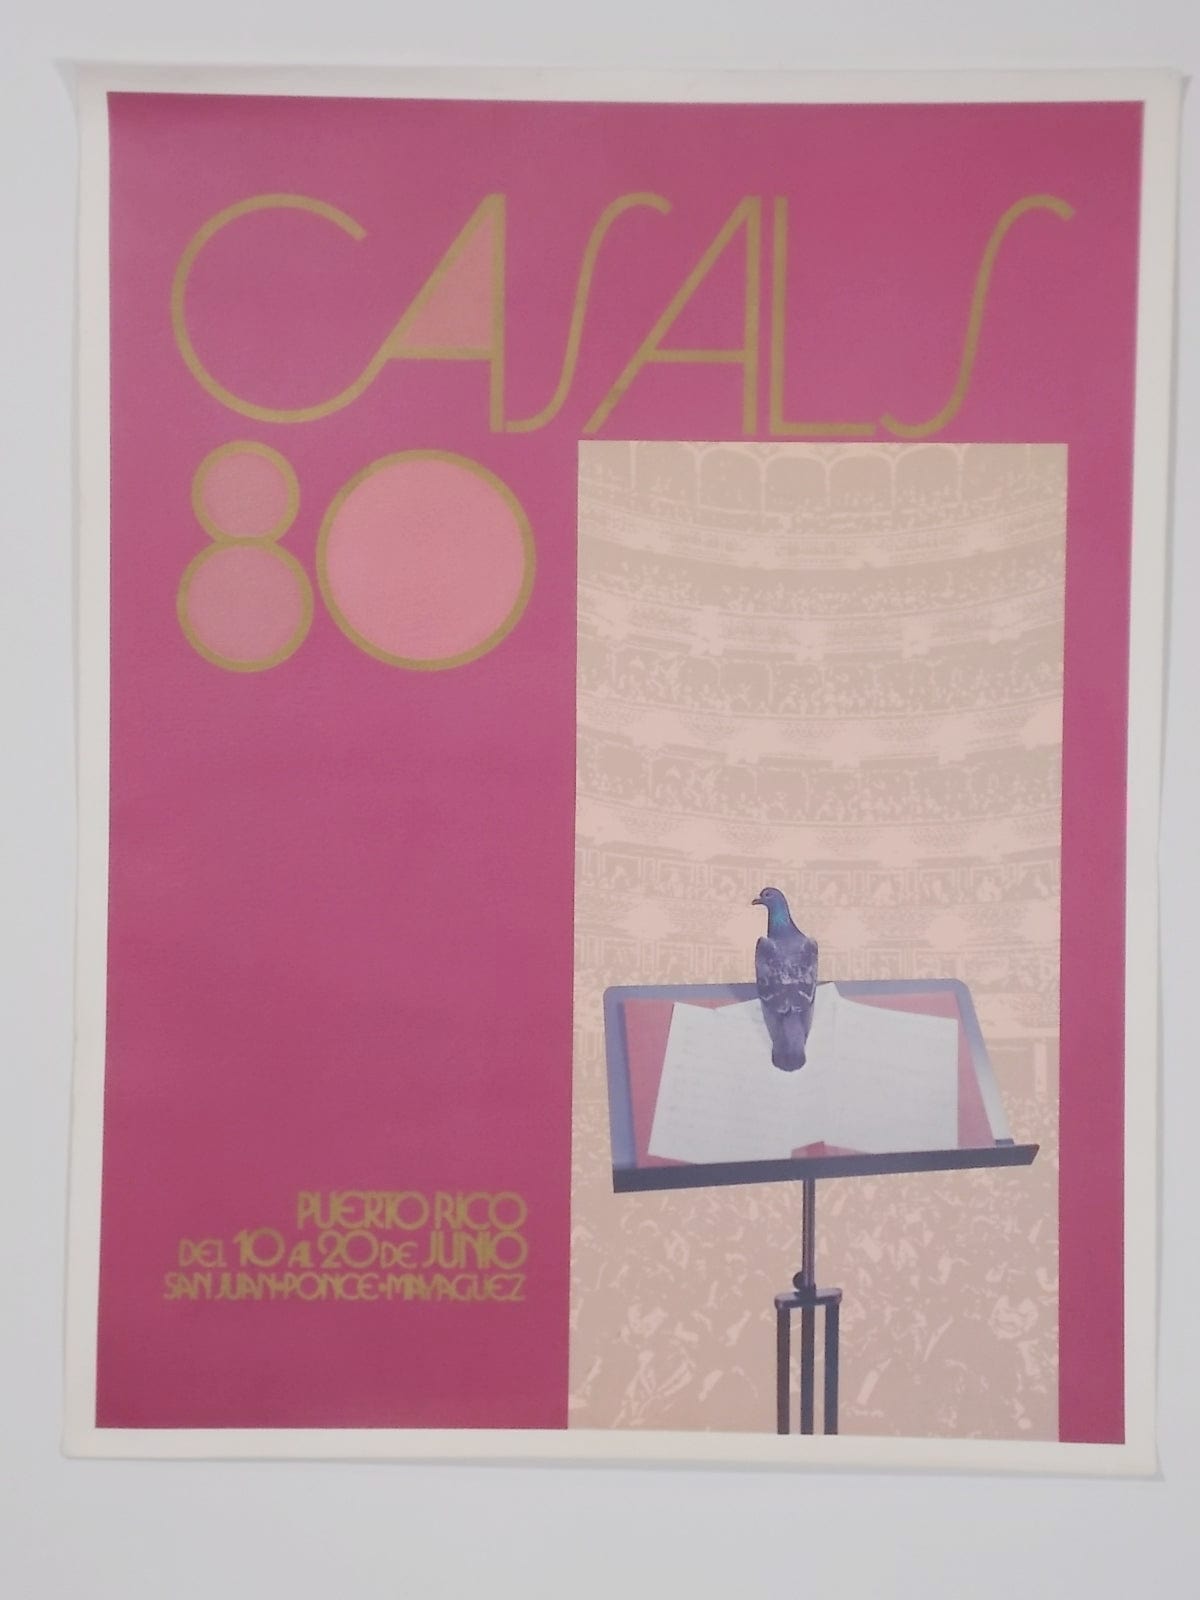 I Like Mike's Mid Century Modern Wall Decor & Art Large Pink Poster "Casals 80" from Annual Puerto Rico Pablo Casals Festival, 1980, Unframed